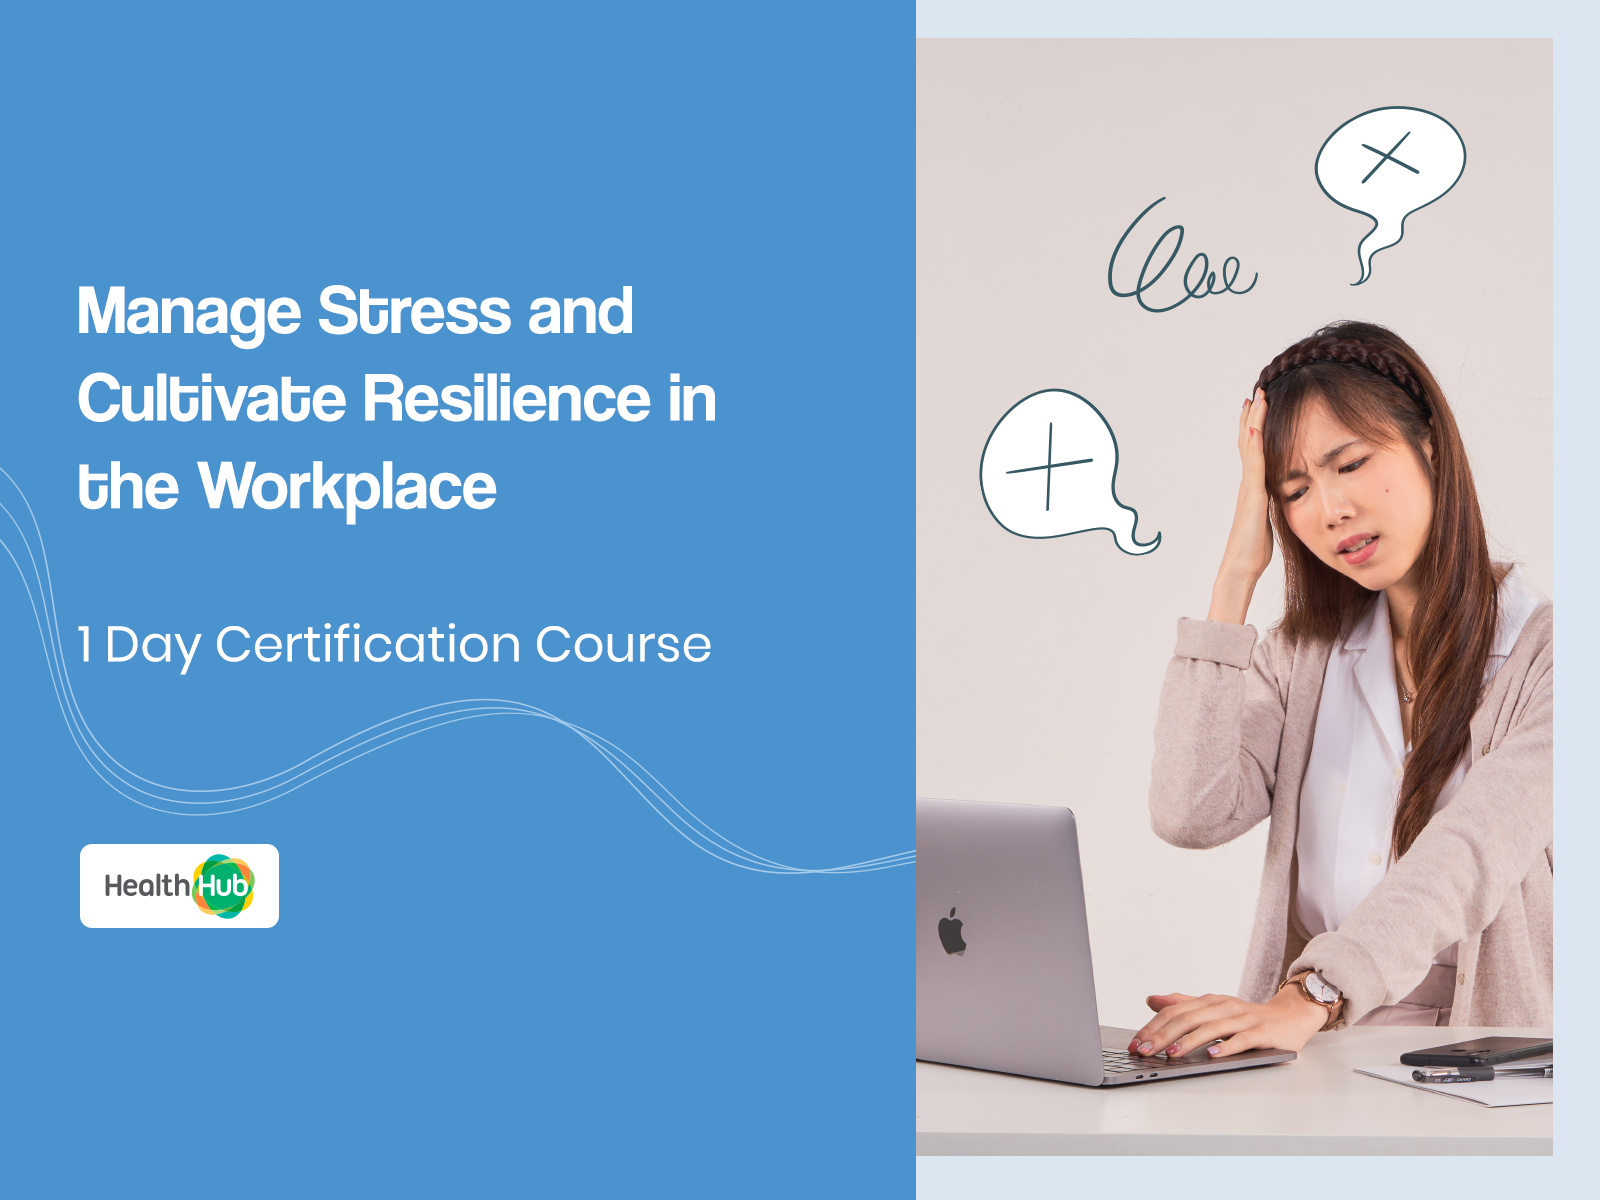 Join our one-day stress management course in Singapore and learn effective strategies for employee wellness and resilience training. Discover mindfulness techniques and stress management tools to better cope with workplace stress and improve your overall well-being.